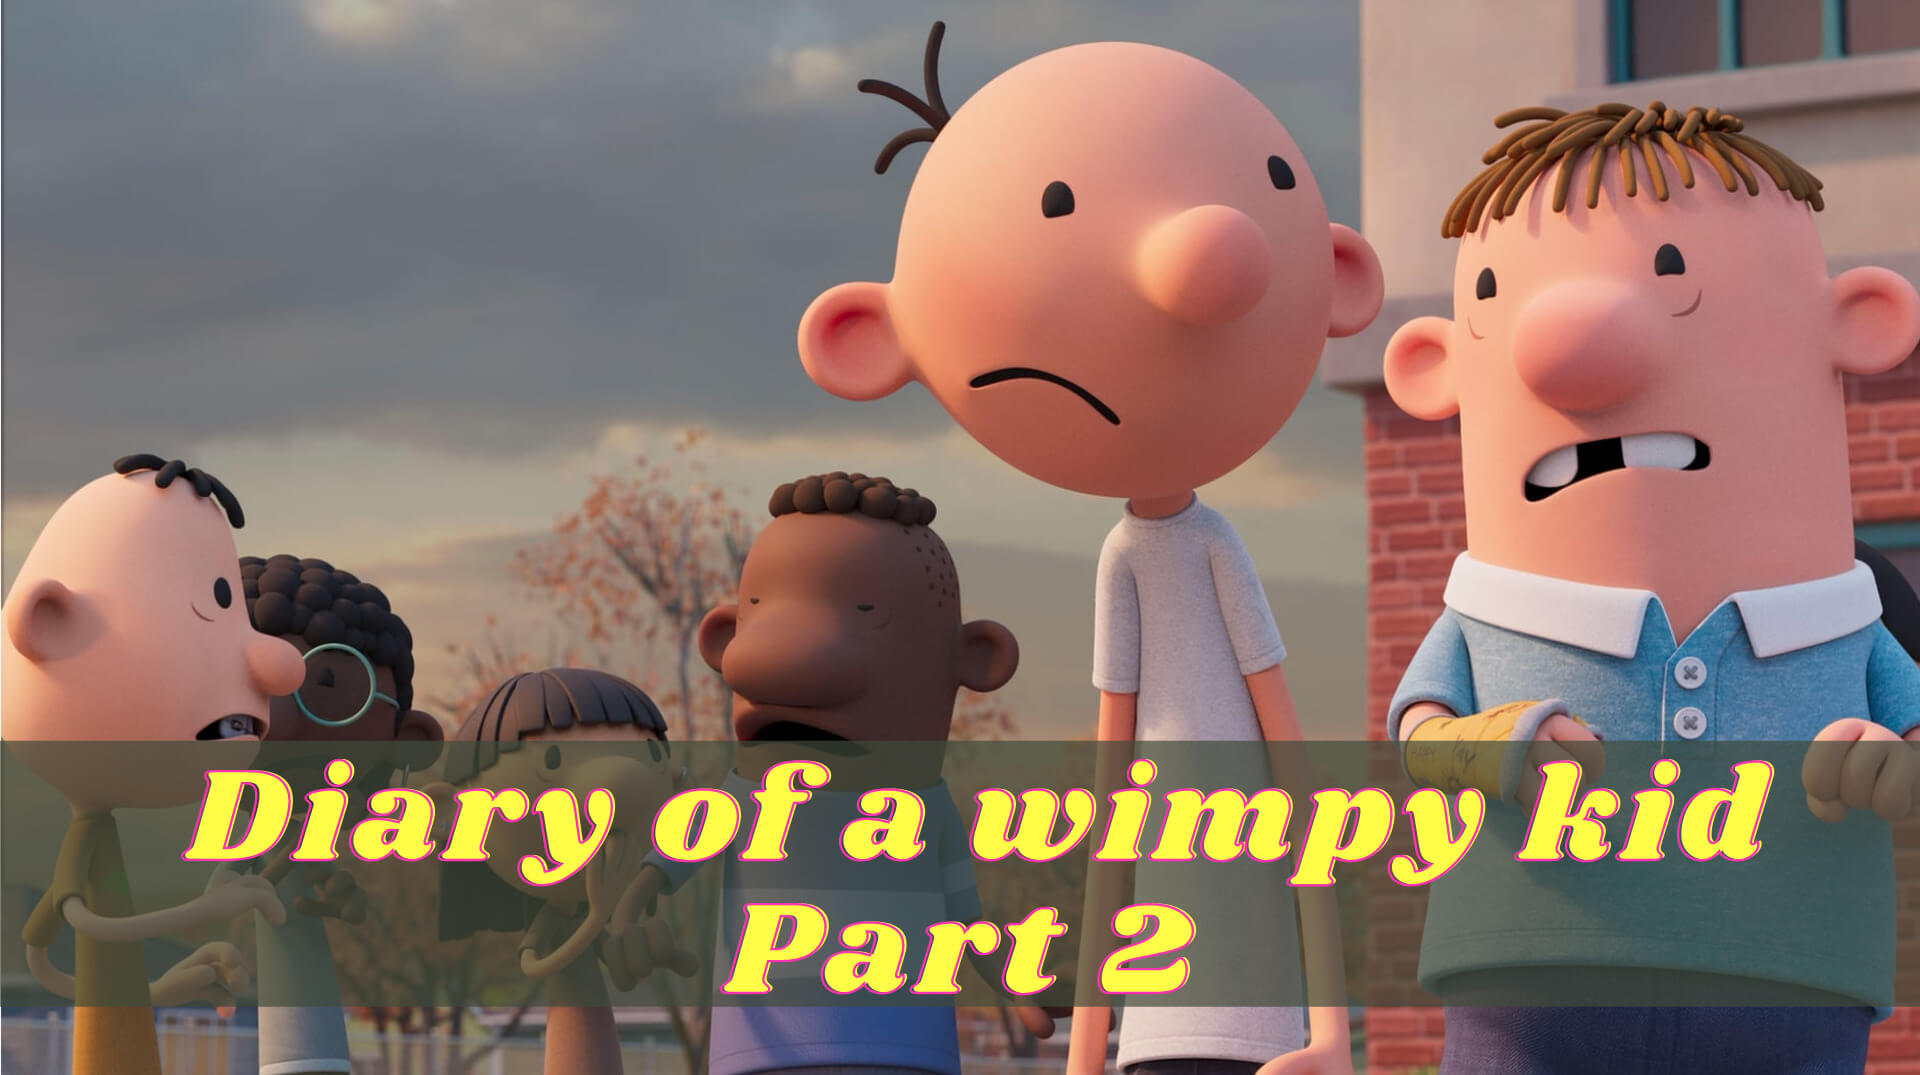 Diary Of a Wimpy Kid Part 2 Rating & Reviews